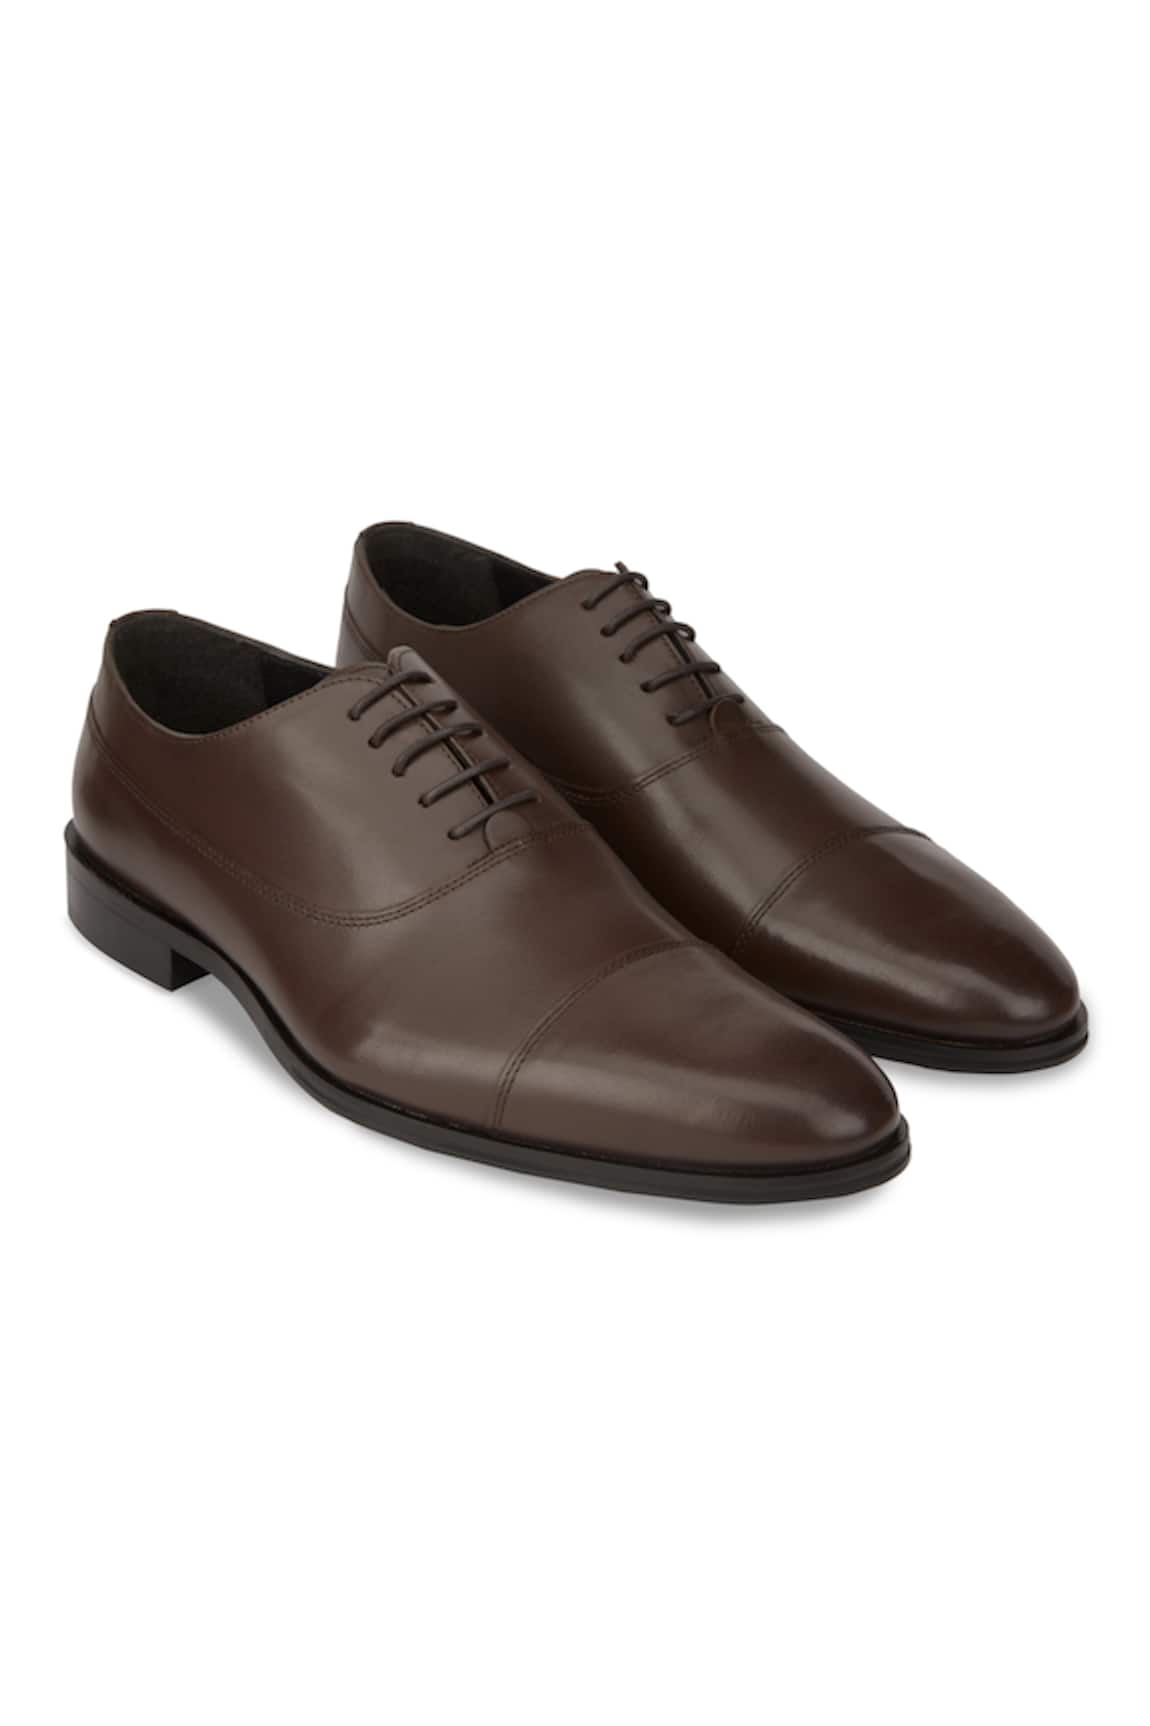 Hats Off Accessories Lace-Up Derby Shoes